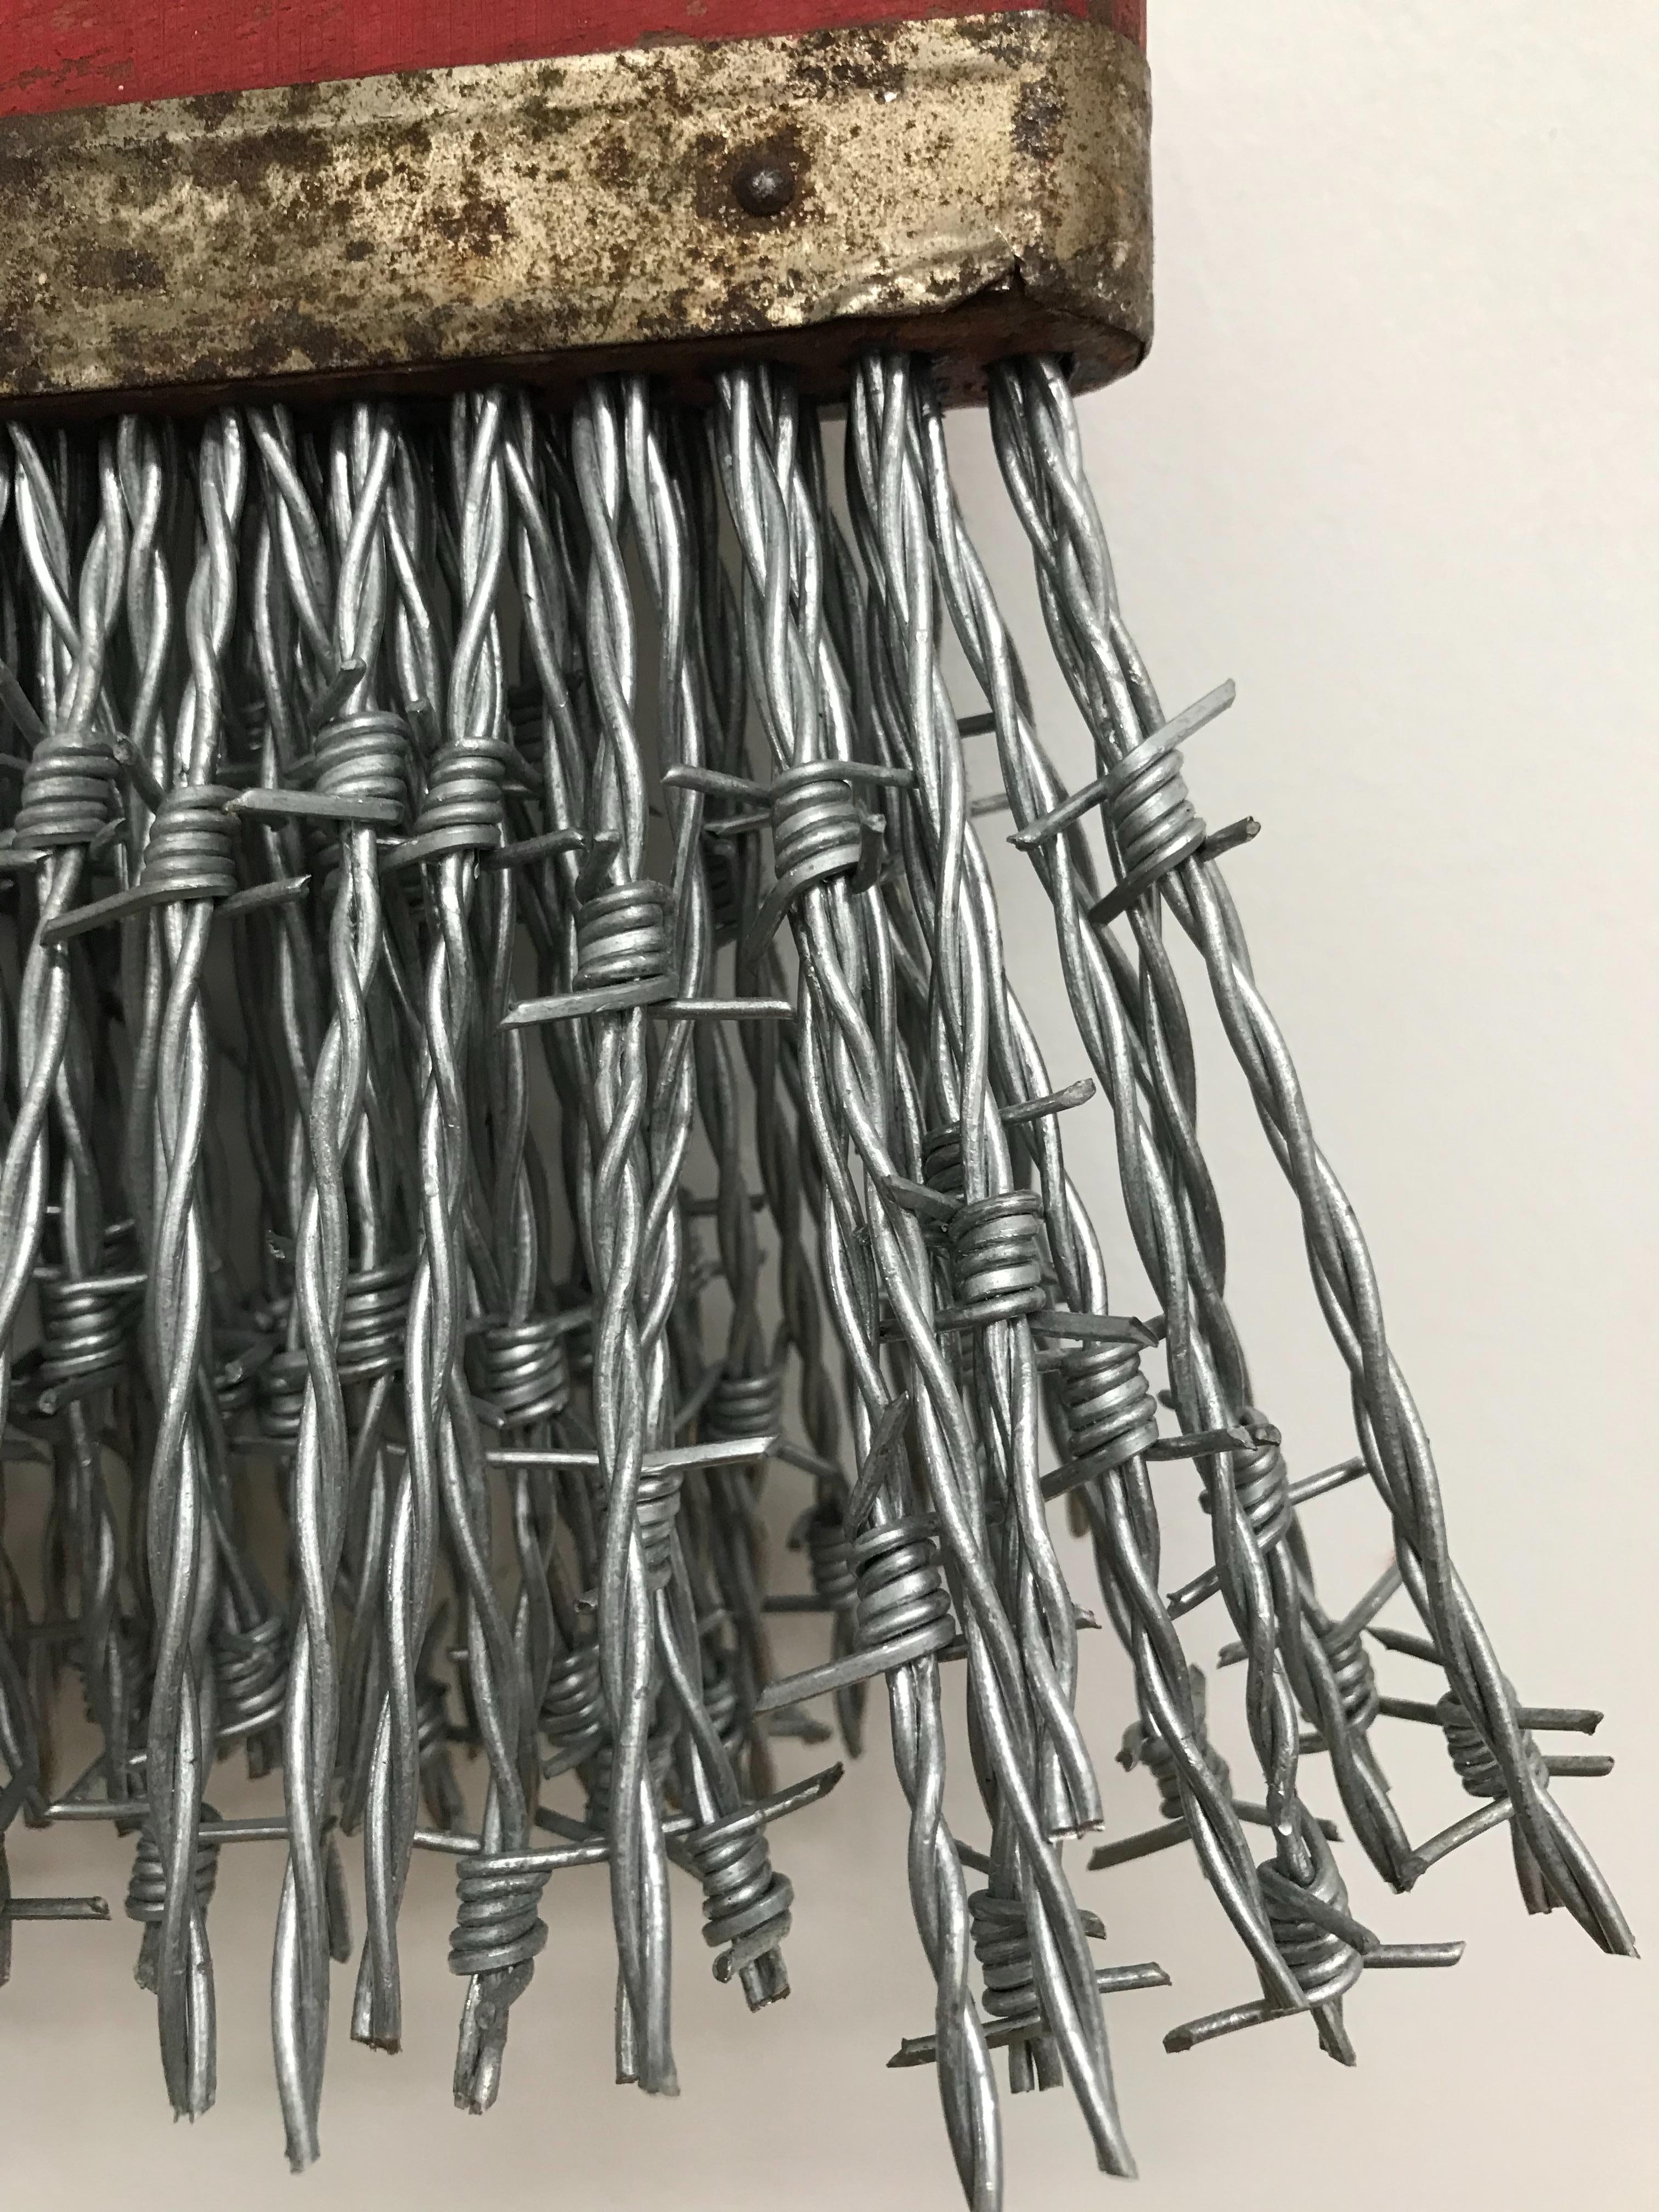 barb wire brush